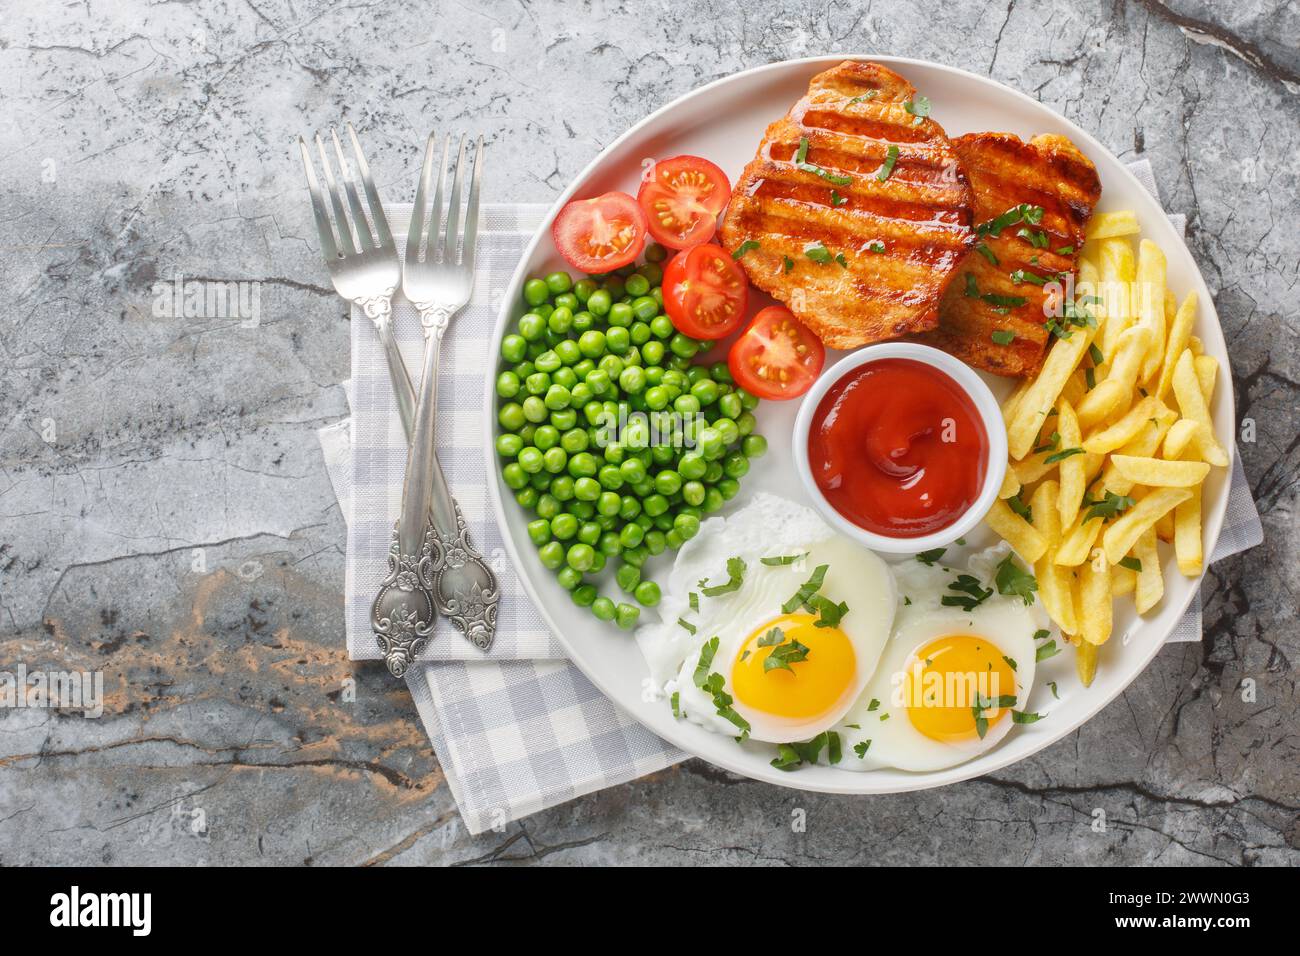 Fried pork loin steak served with French fries, fied eggs, green pea and fresh tomato closeup on the plate on the table. Horizontal top view from abov Stock Photo